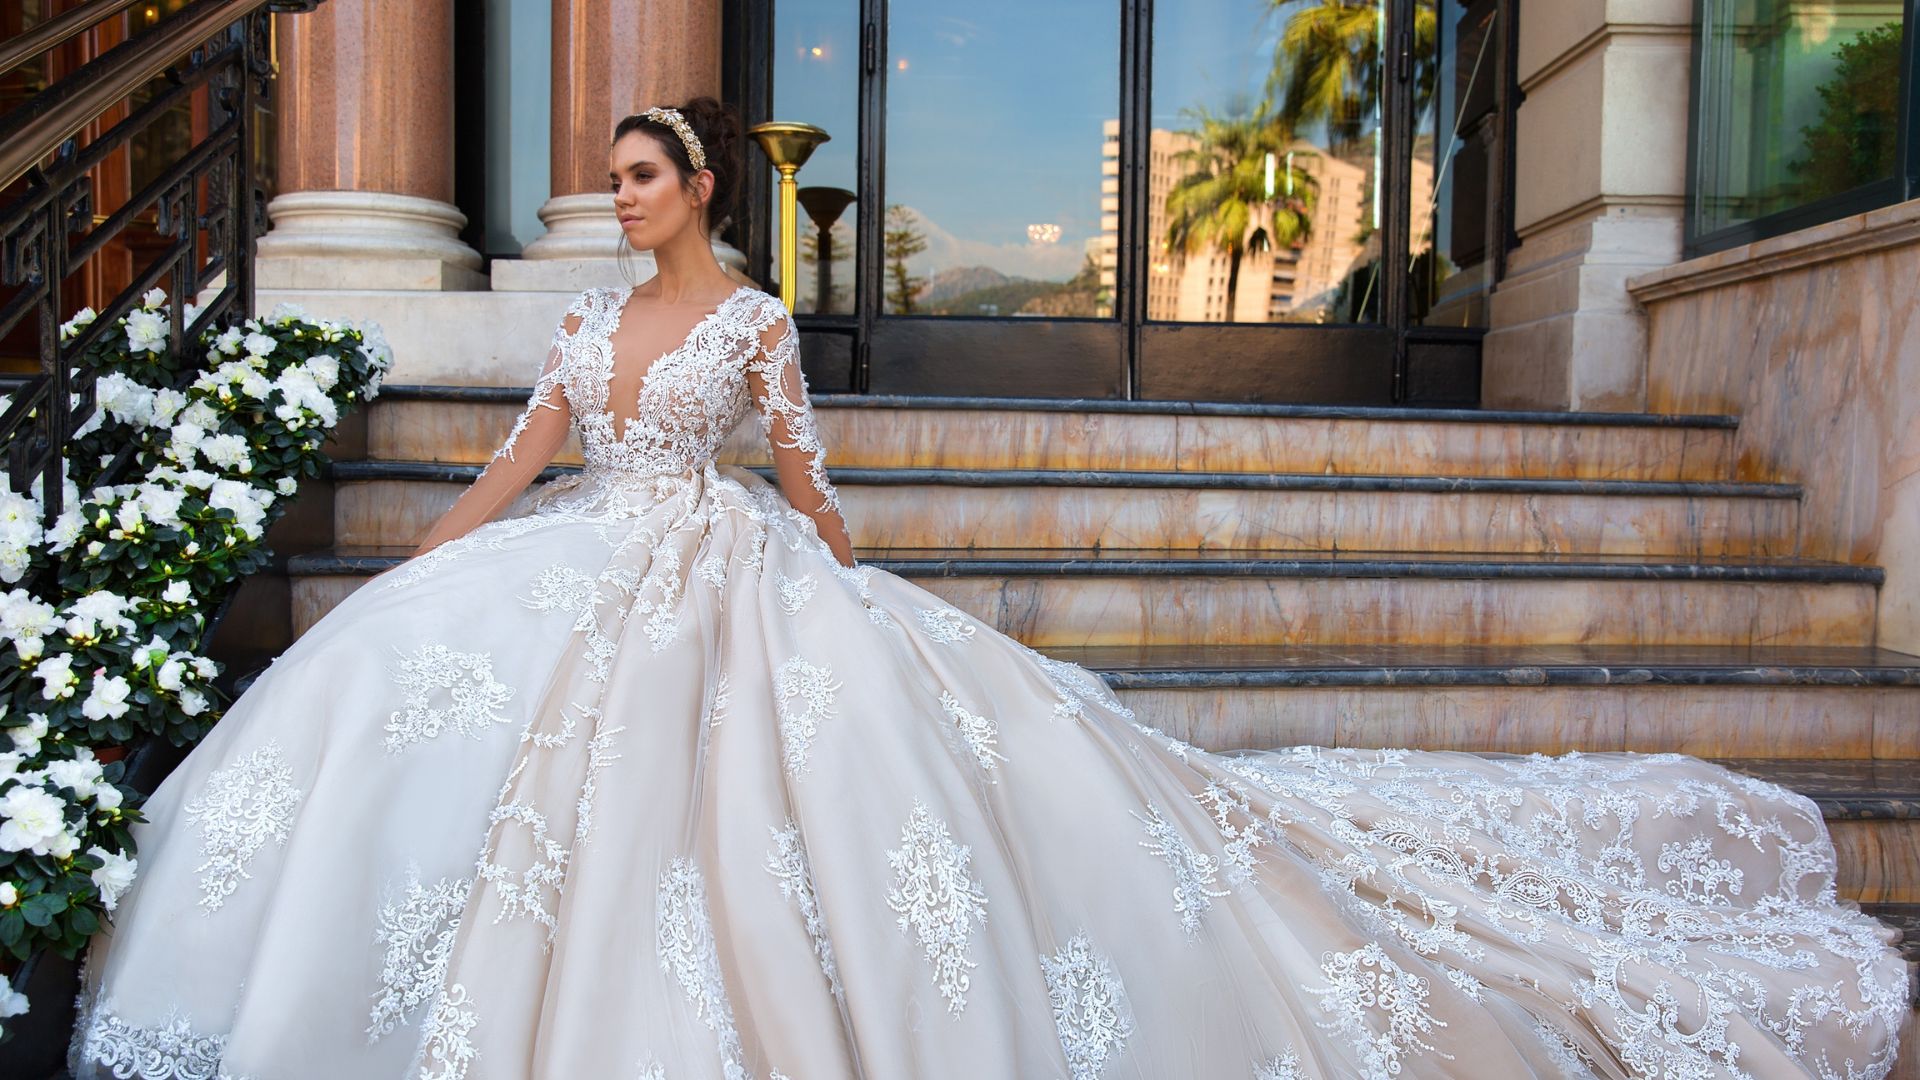 The Best Bridal Gown Styles for Short Brides